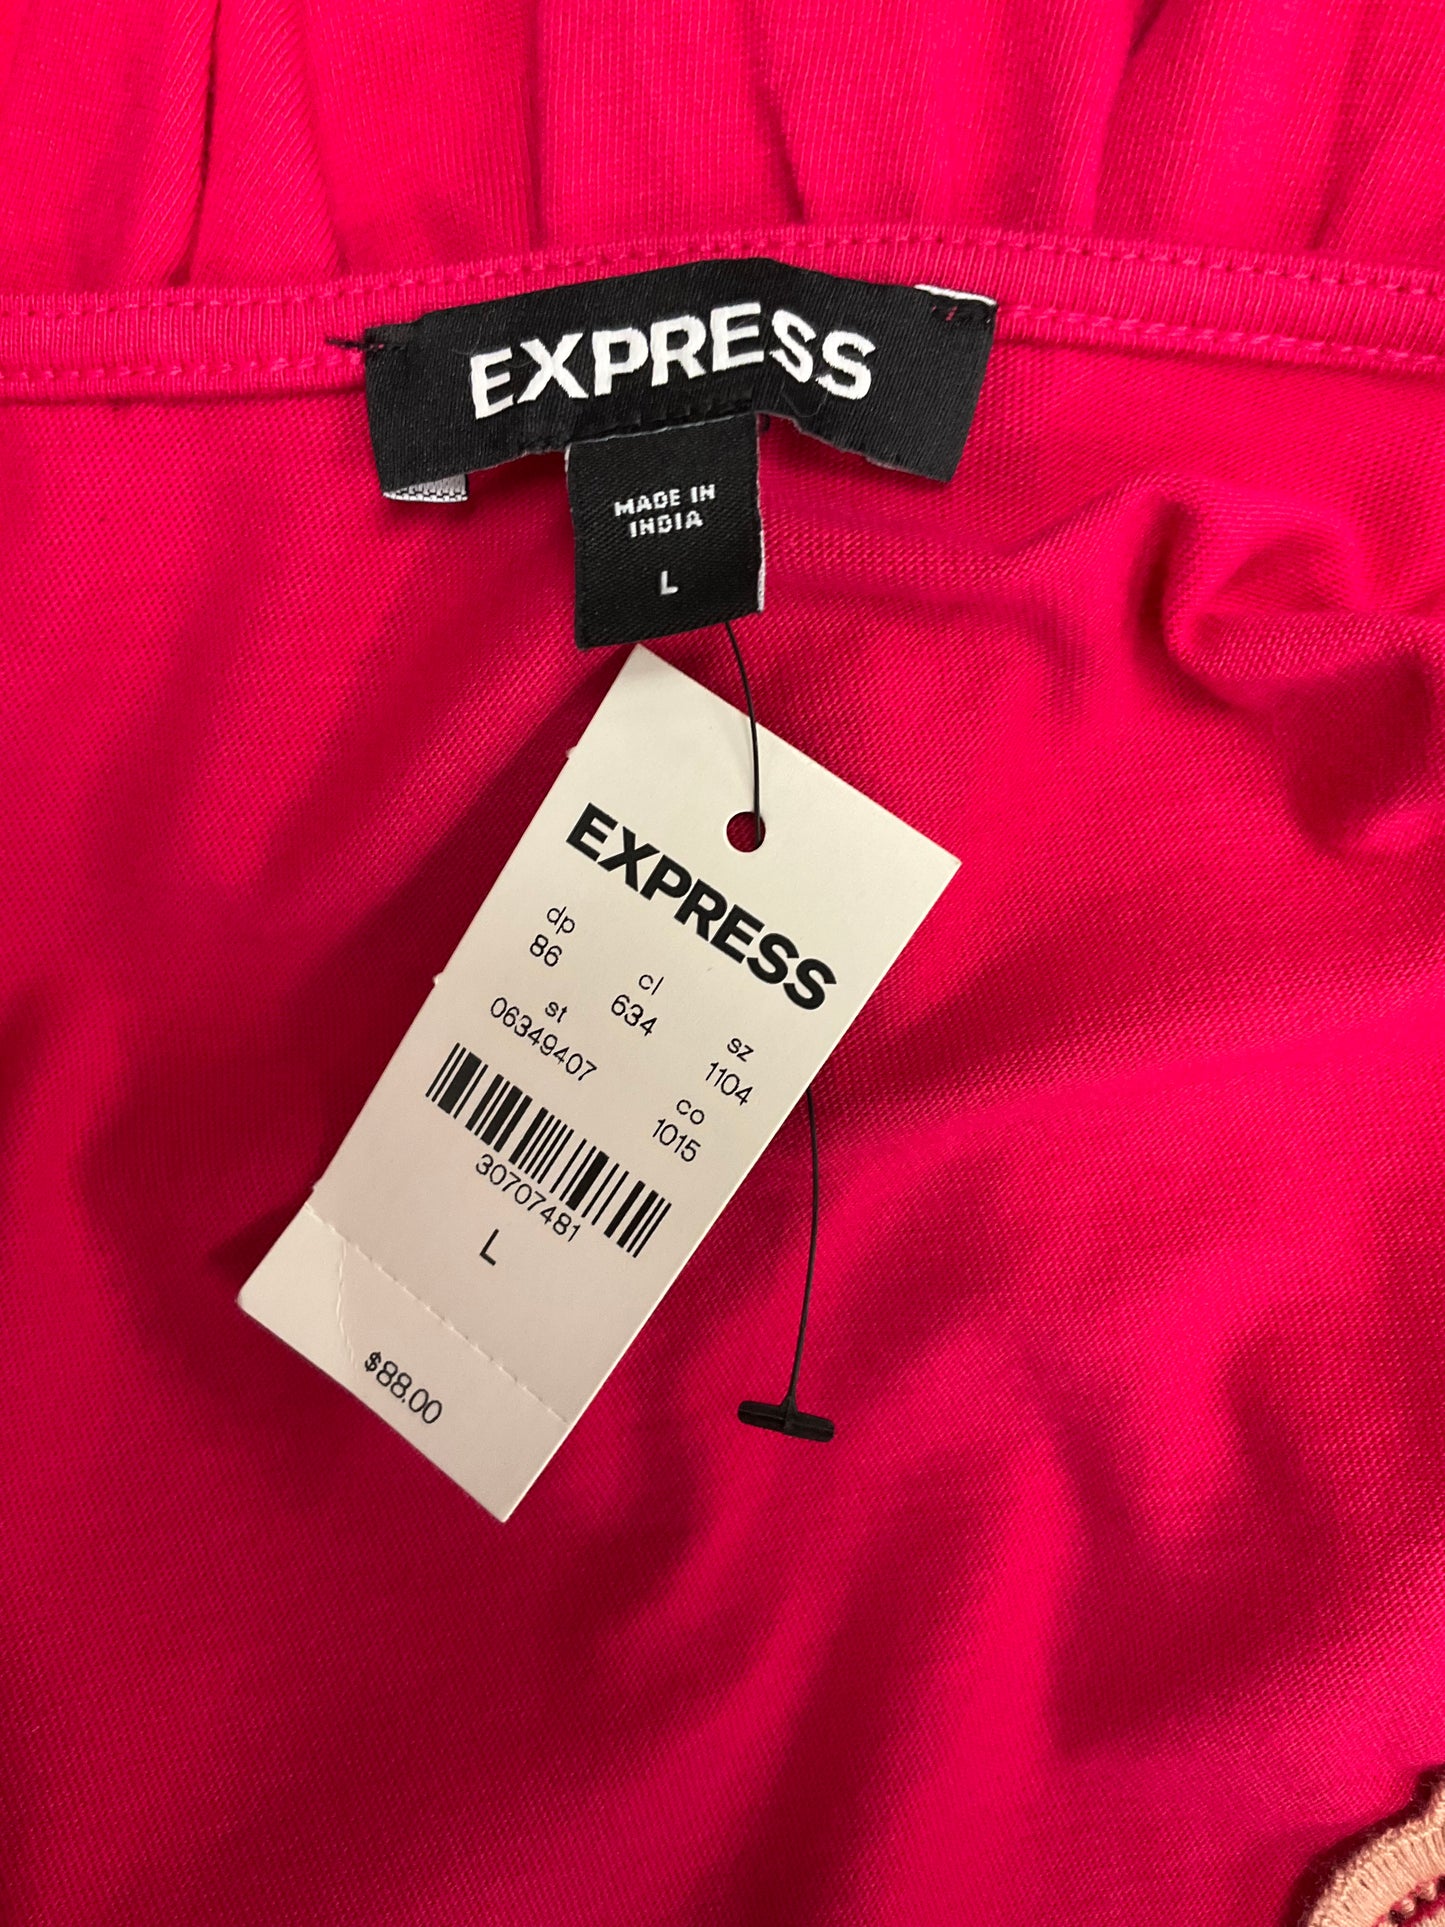 Top Sleeveless By Express  Size: L